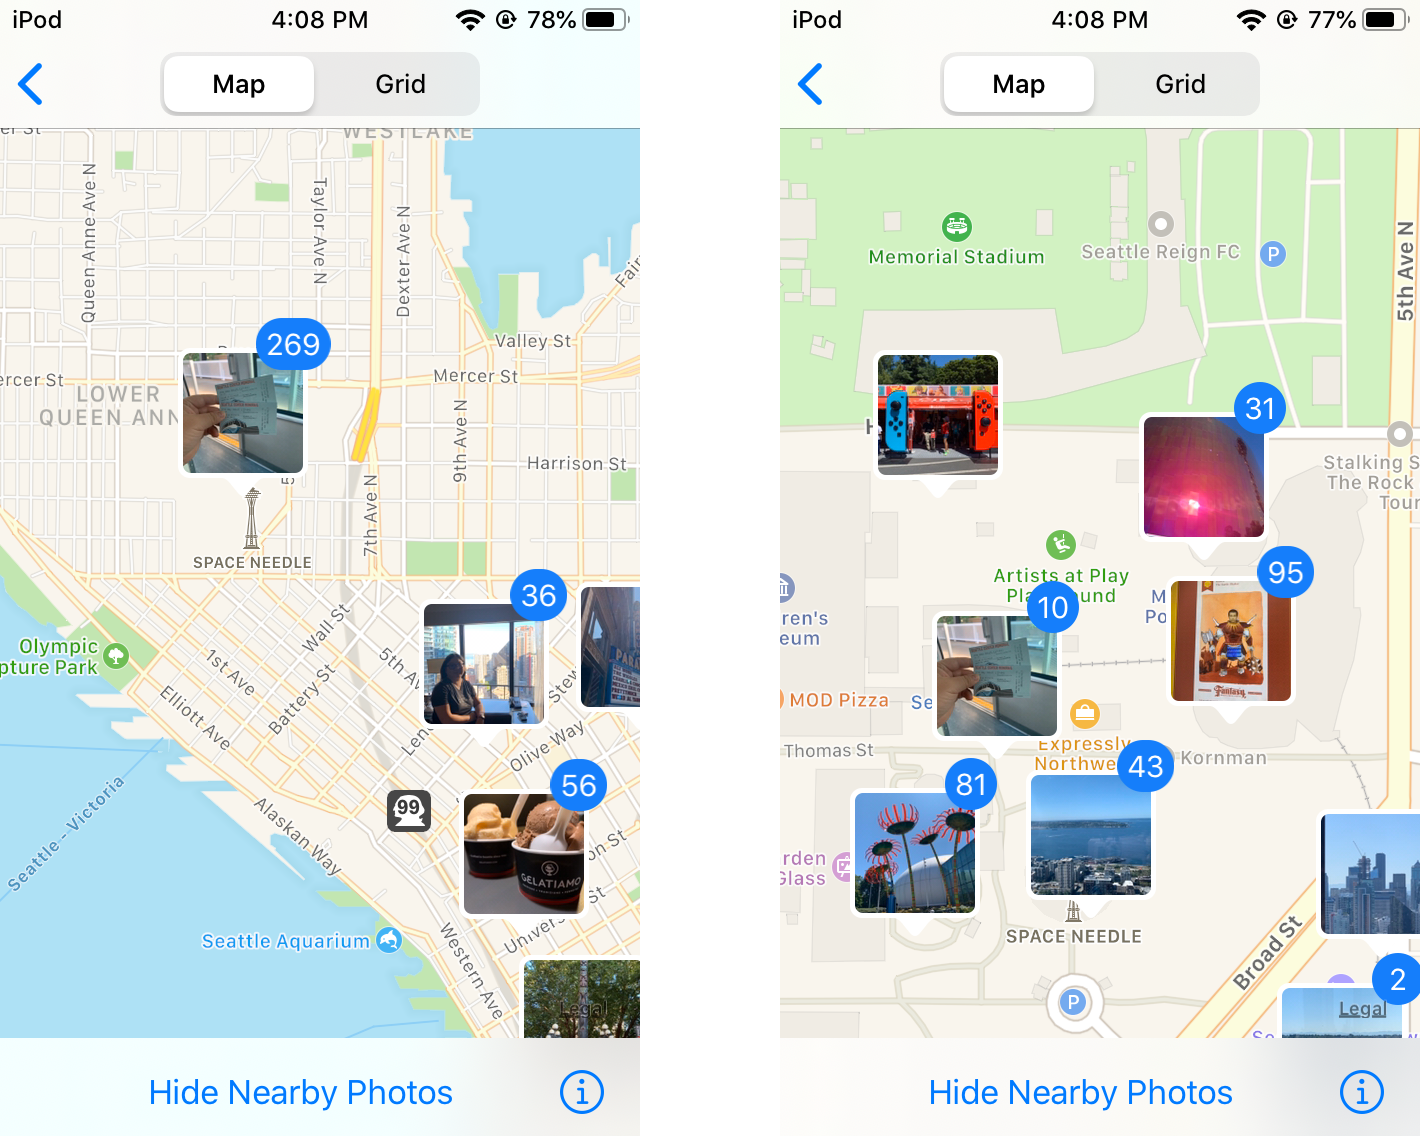 Viewing Nearby Photos means photos and videos that aren't in the Memory